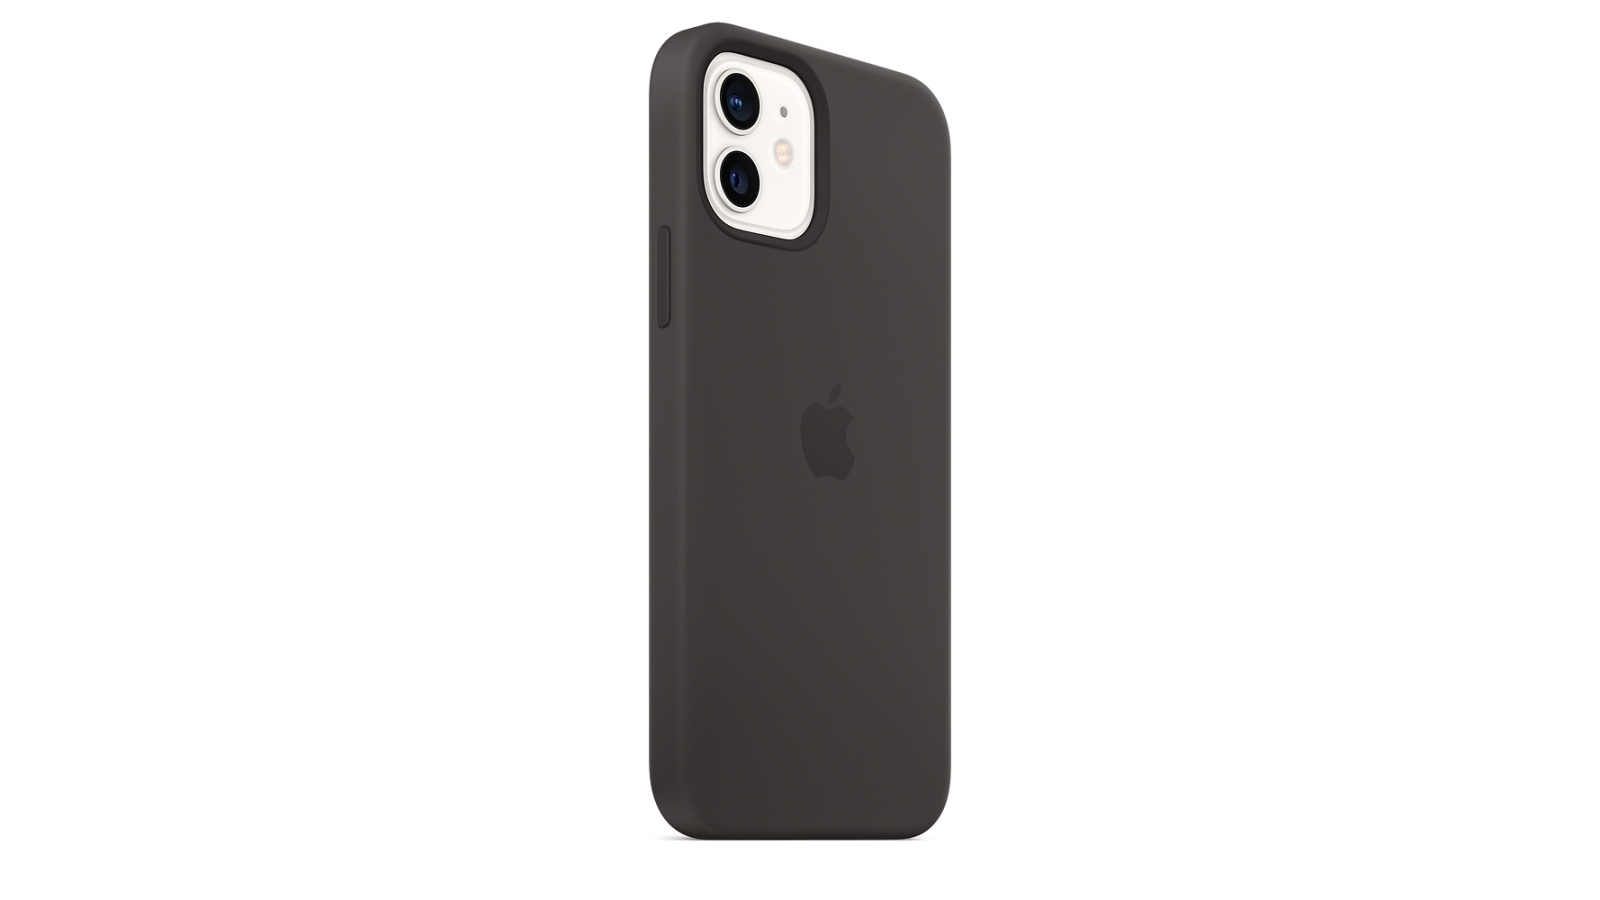 iPhone 12  12 Pro Silicone Case with MagSafe - Black - Apple